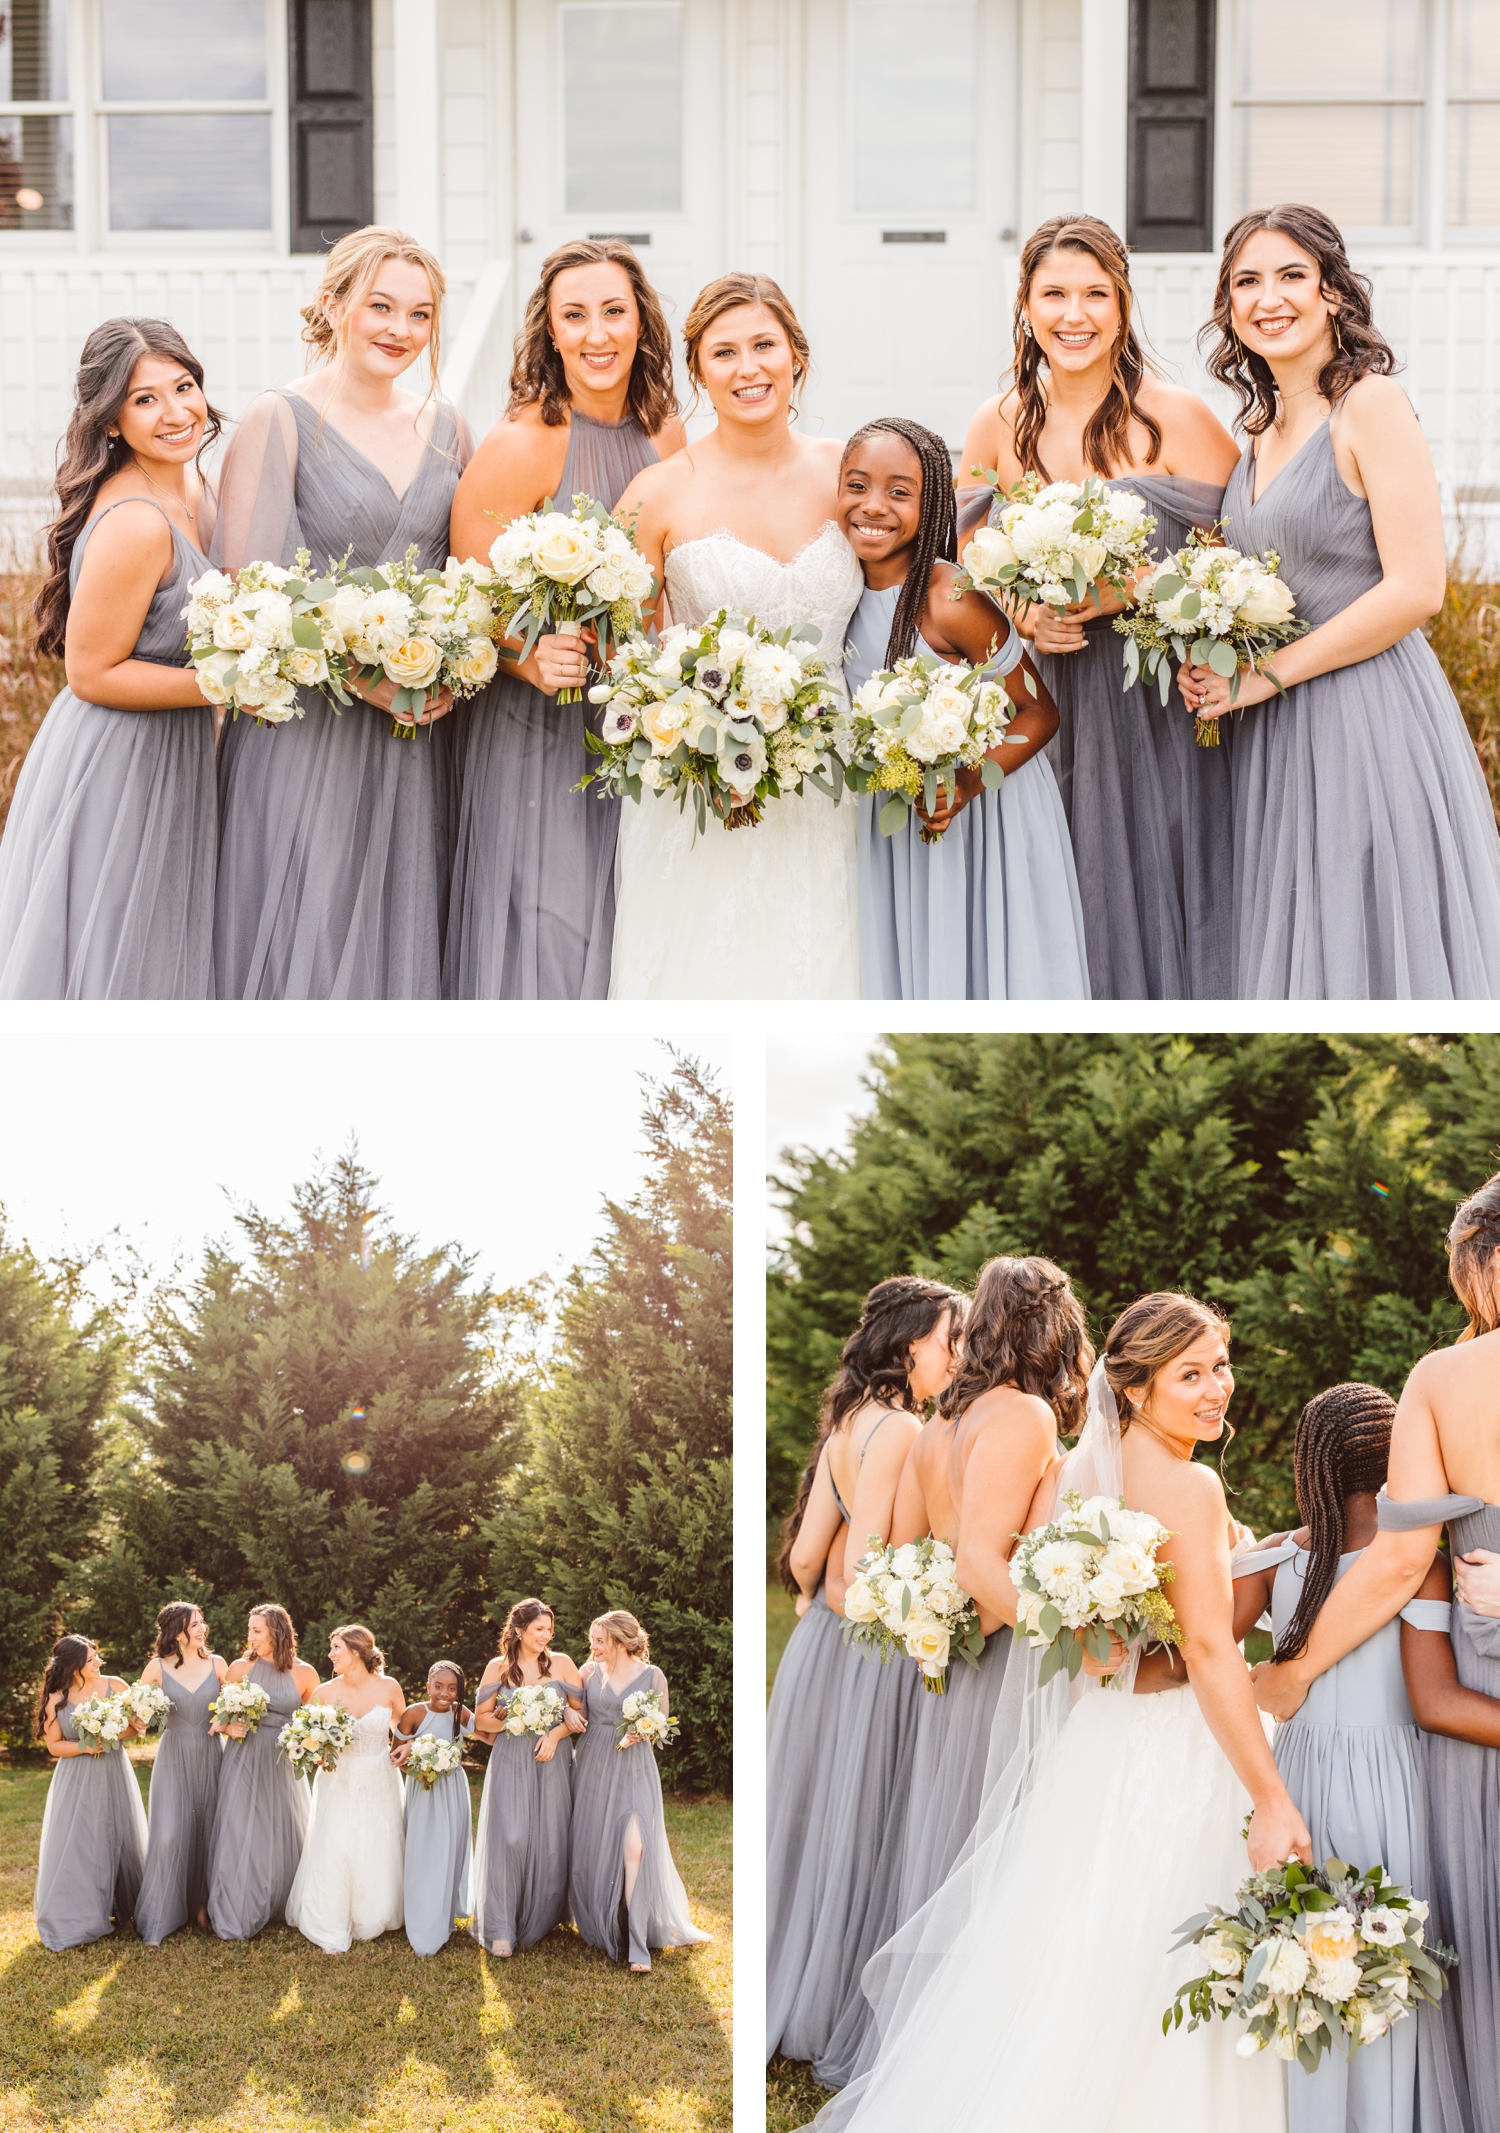 Bridesmaids in light blue dresses with bride | bride and bridesmaids walking and holding bouquets | bride looking back while standing with bridesmaids | Brooke Michelle Photography